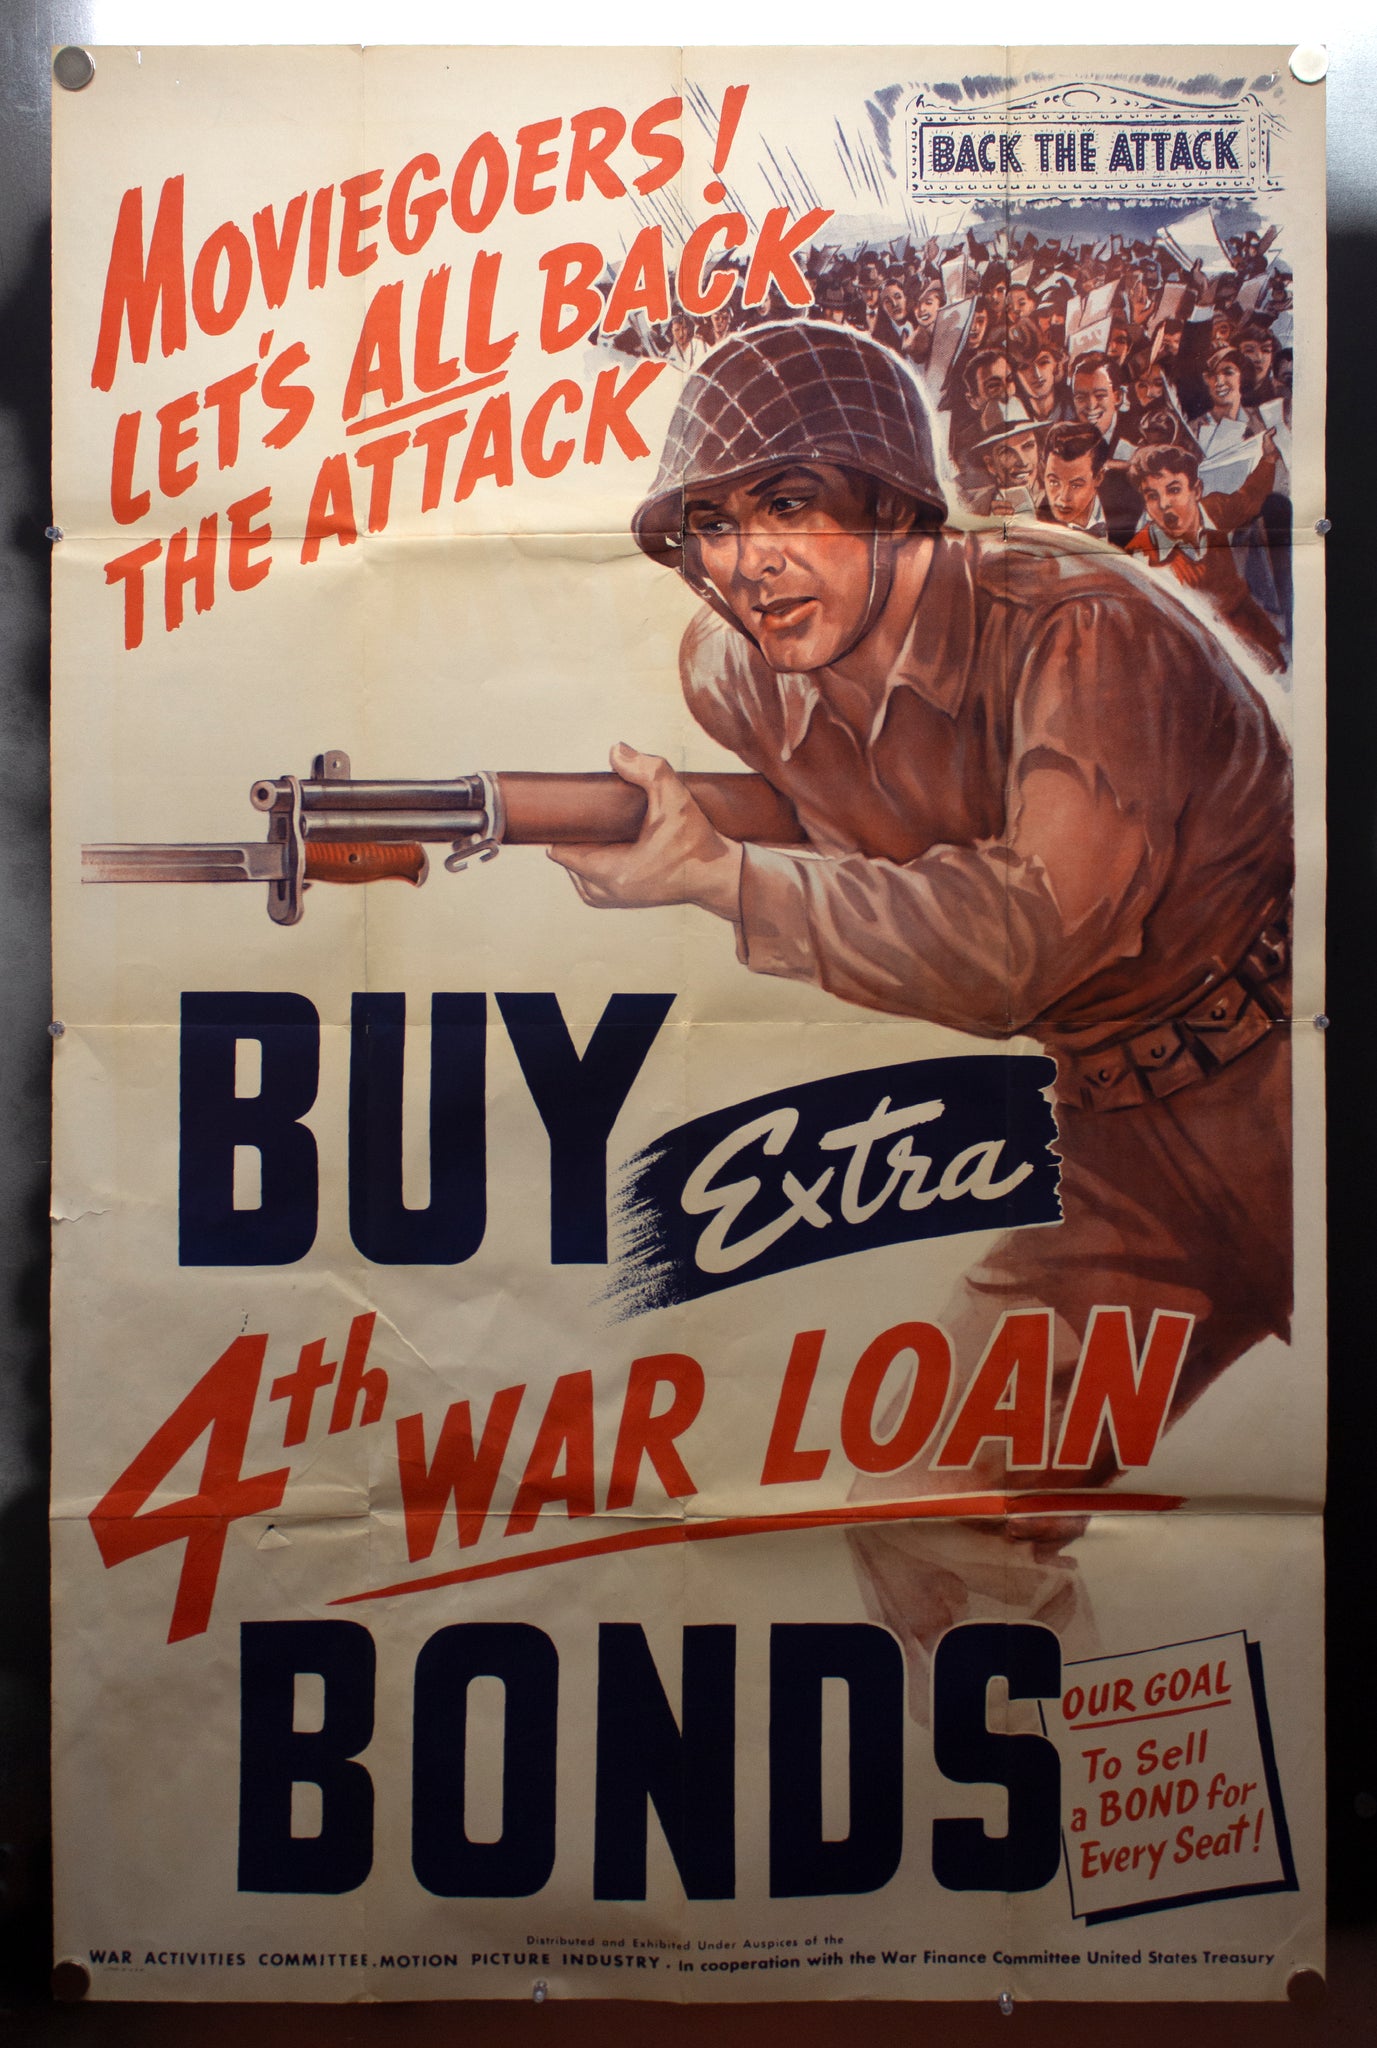 1944 Moviegoers Lets All Back The Attack! Motion Picture War Activities Committee WWII